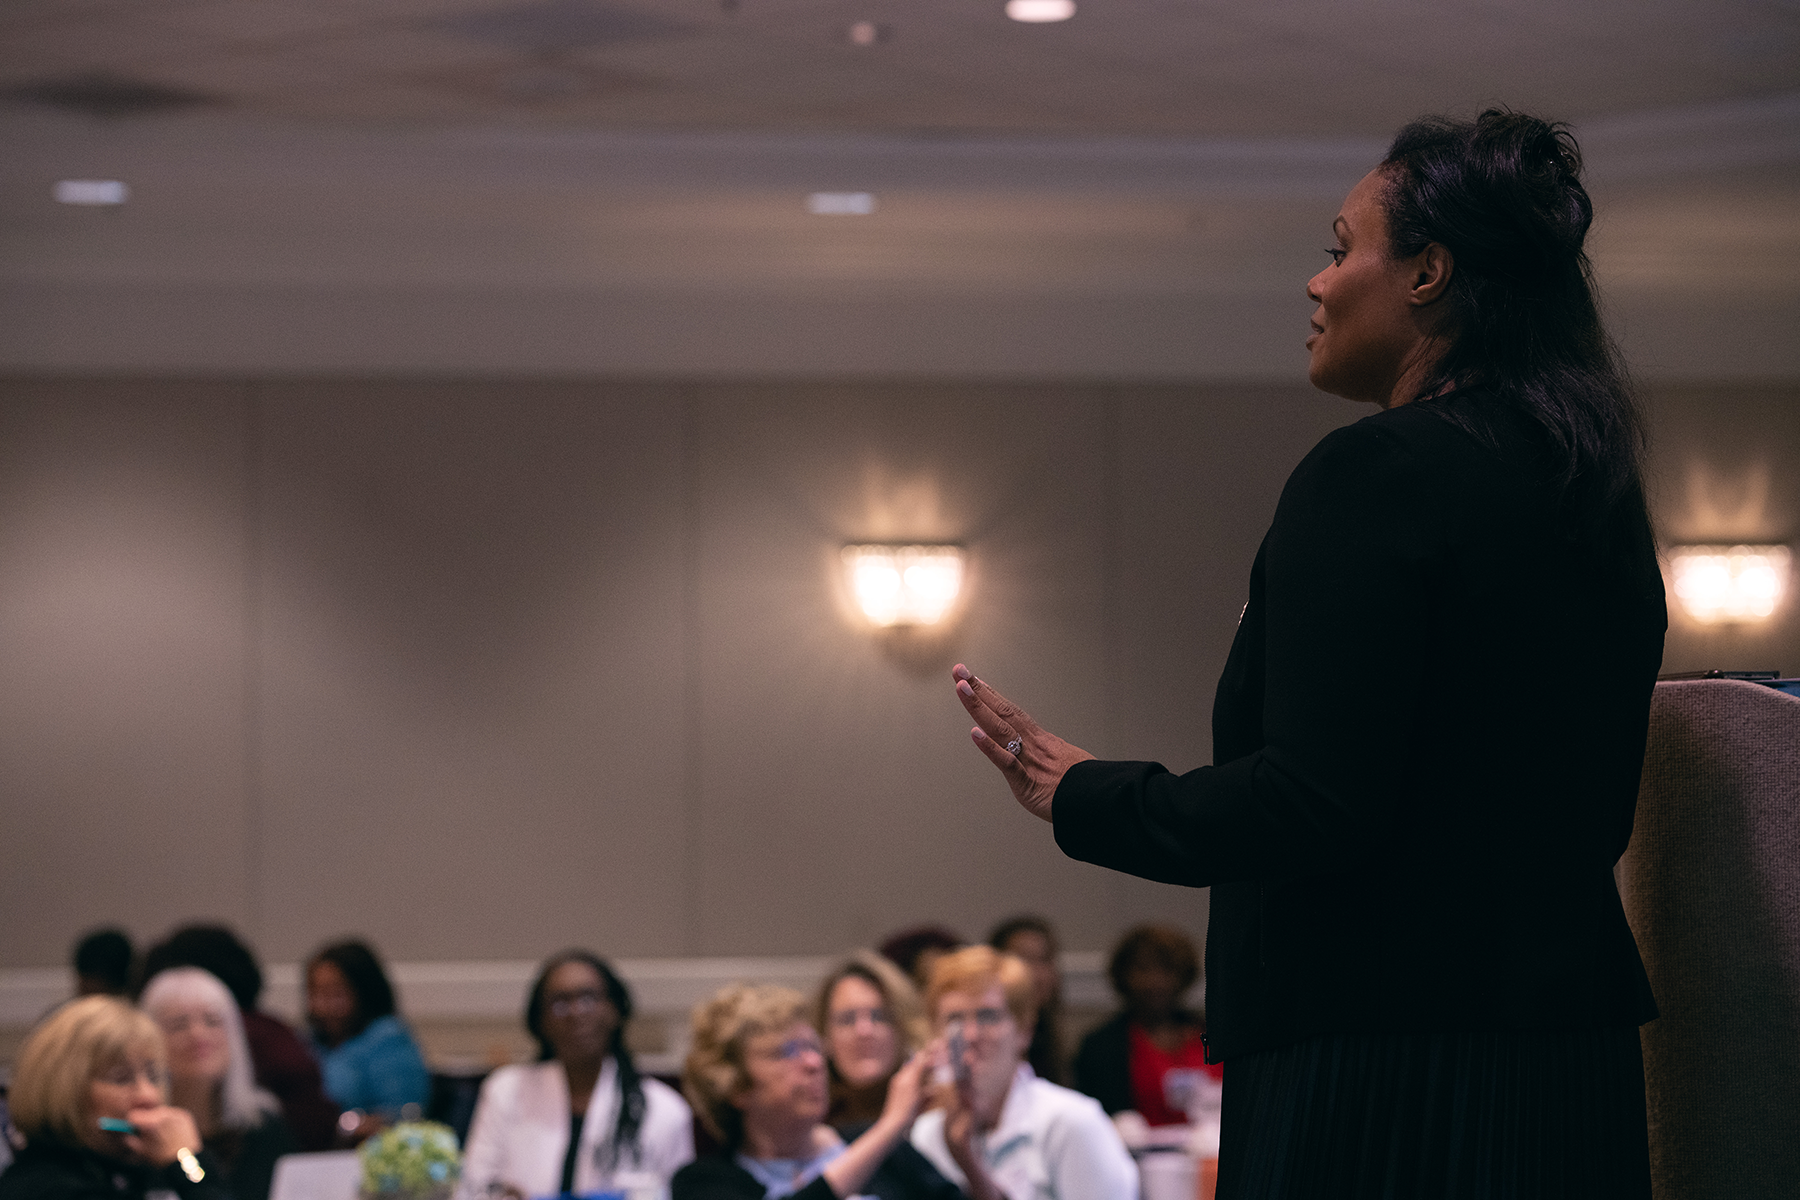 Keynote speaker Leah JM Dean, founder of the leadership, professional, and personal development company Conduit International Ltd., presenting at the Adventist Women Leaders (AWL) luncheon held January 11, 2023